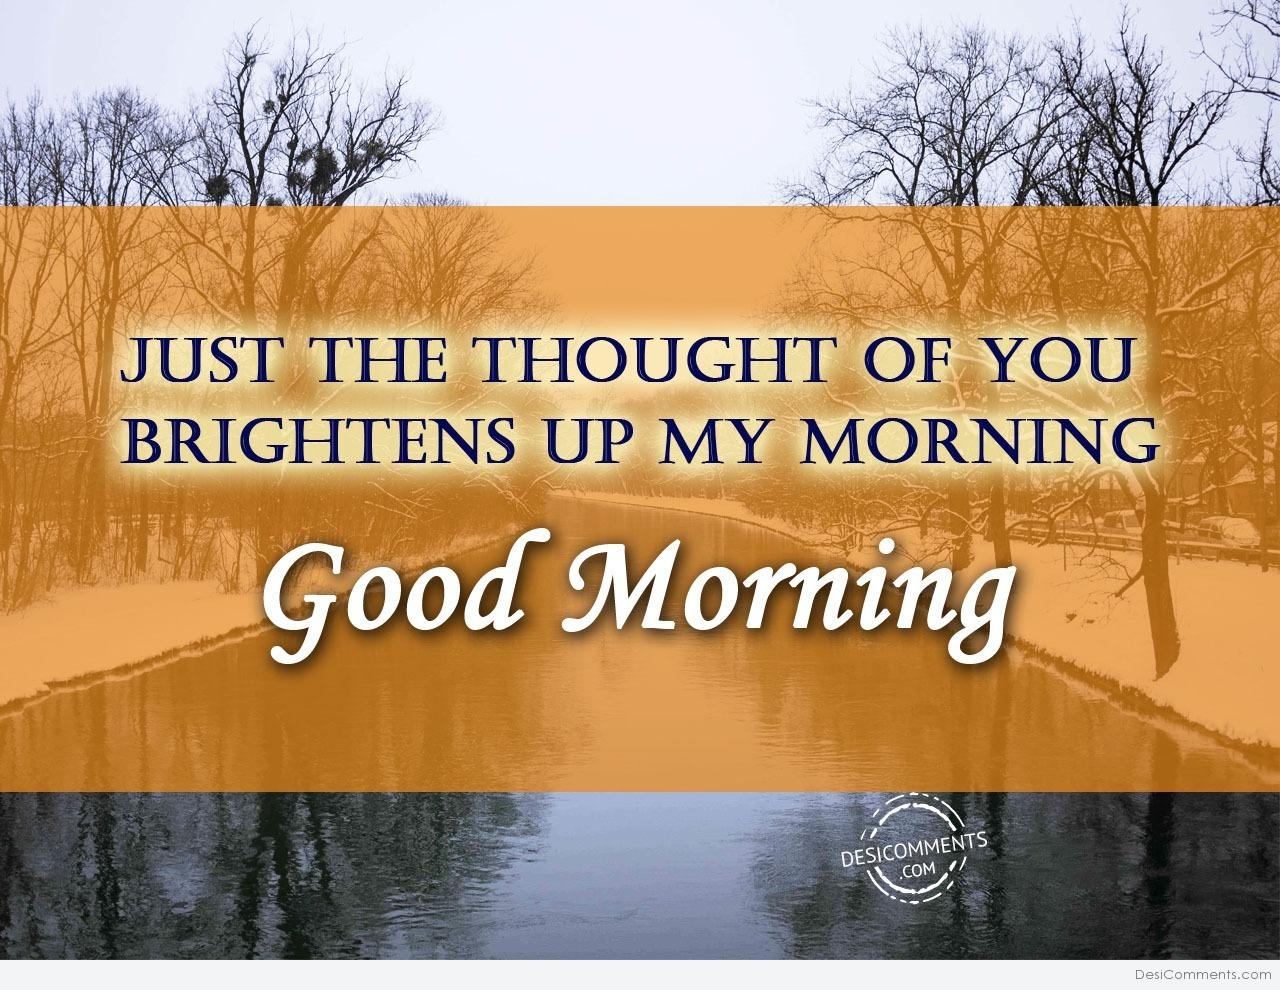 Just The Thought Of You – Good Morning - DesiComments.com